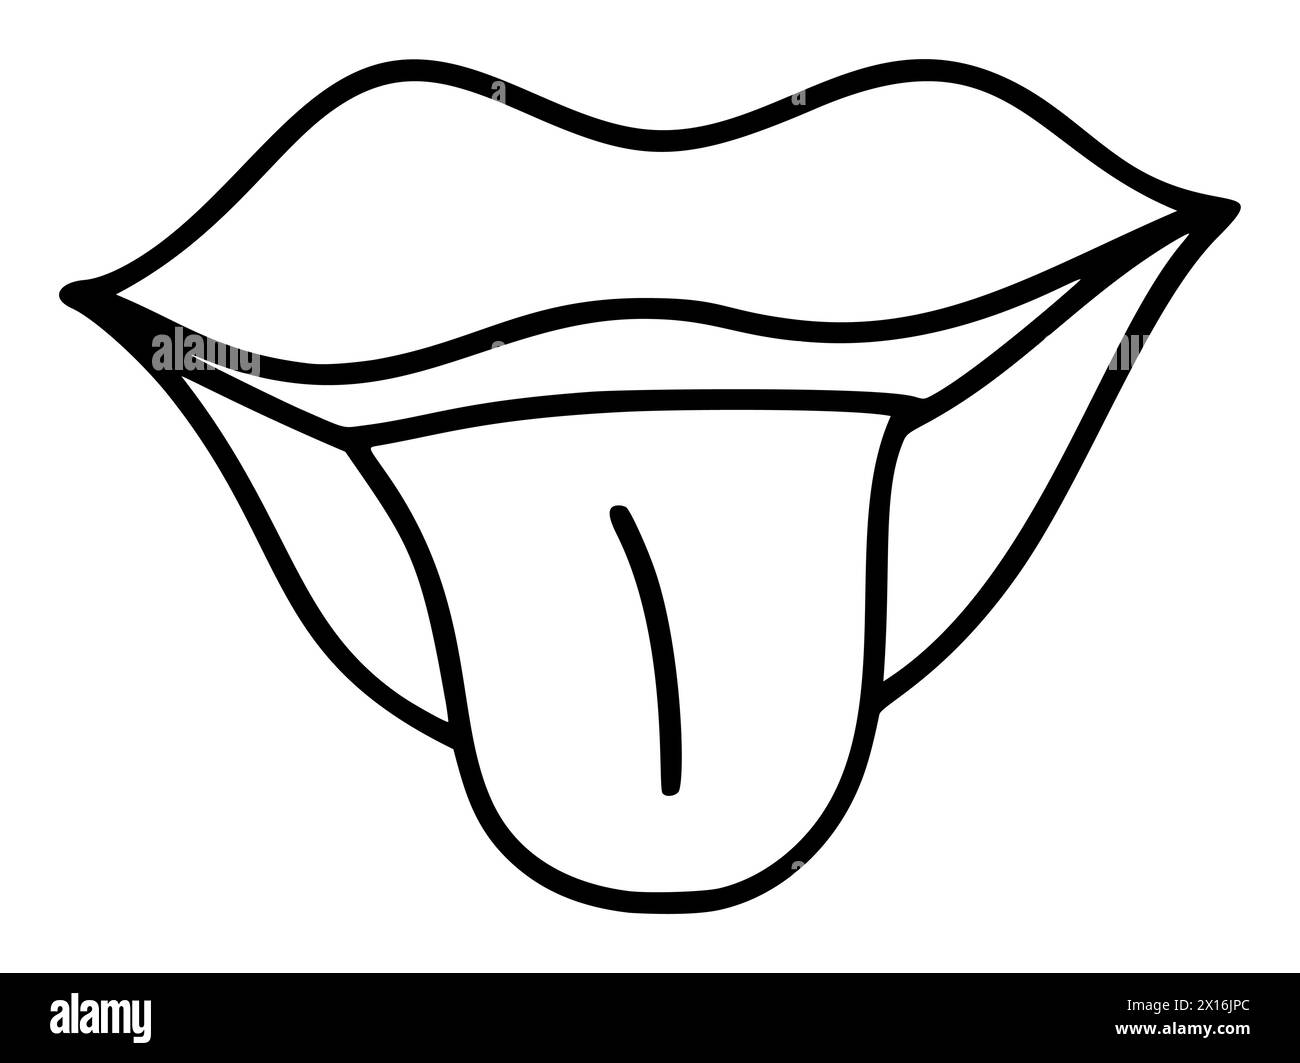 Hand drawn lips with tongue icon in simple doodle style. Woman mouth with lines. Monochrome design Taste, body feelings sense organs Stock Vector